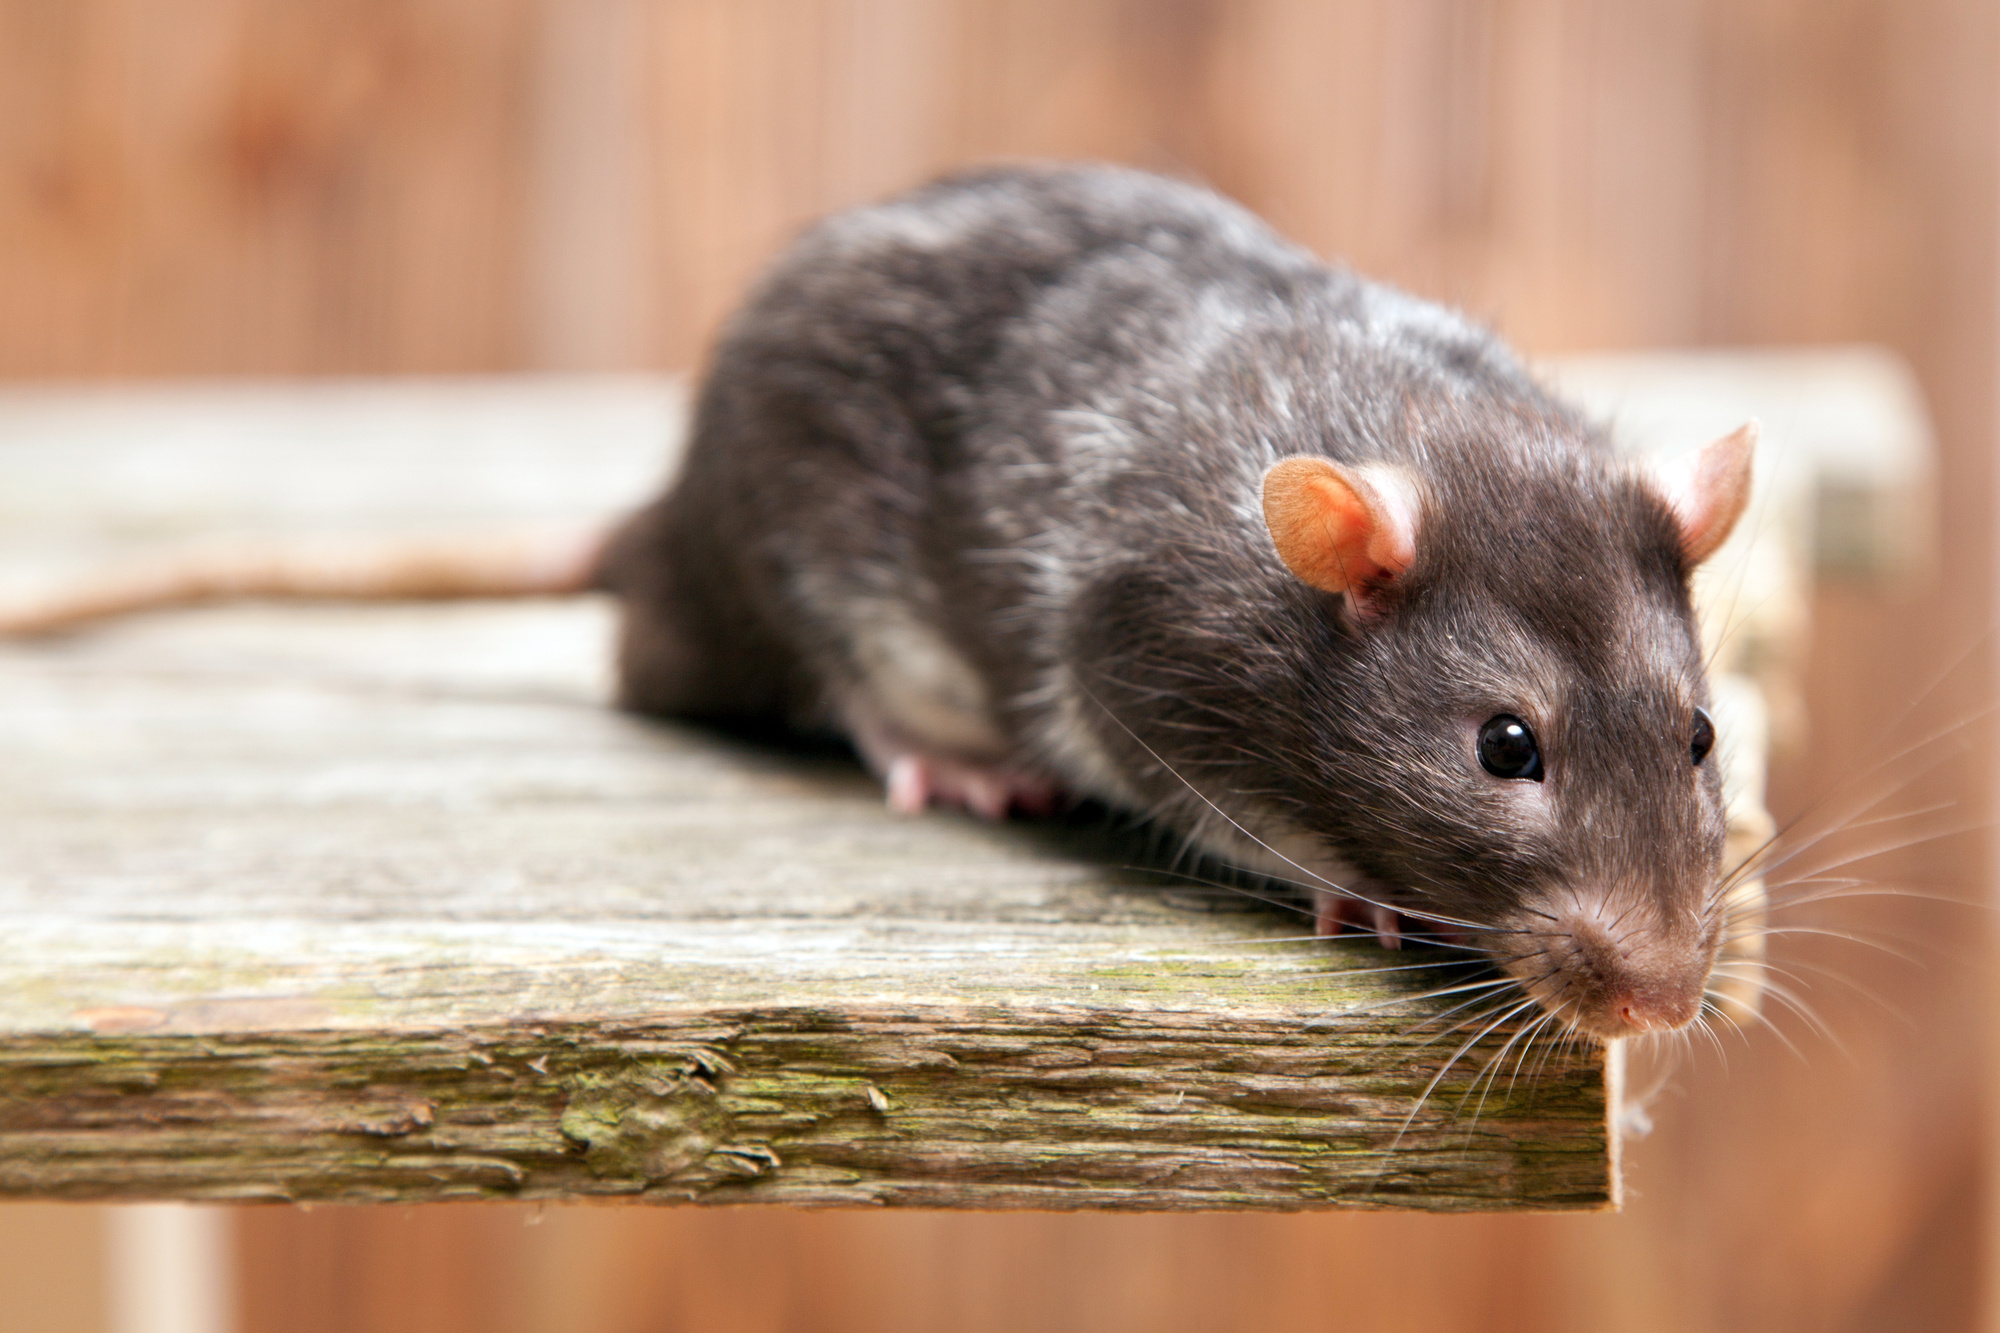 How To Get Rid Of Roof Rats Quickly, Easily & Humanely